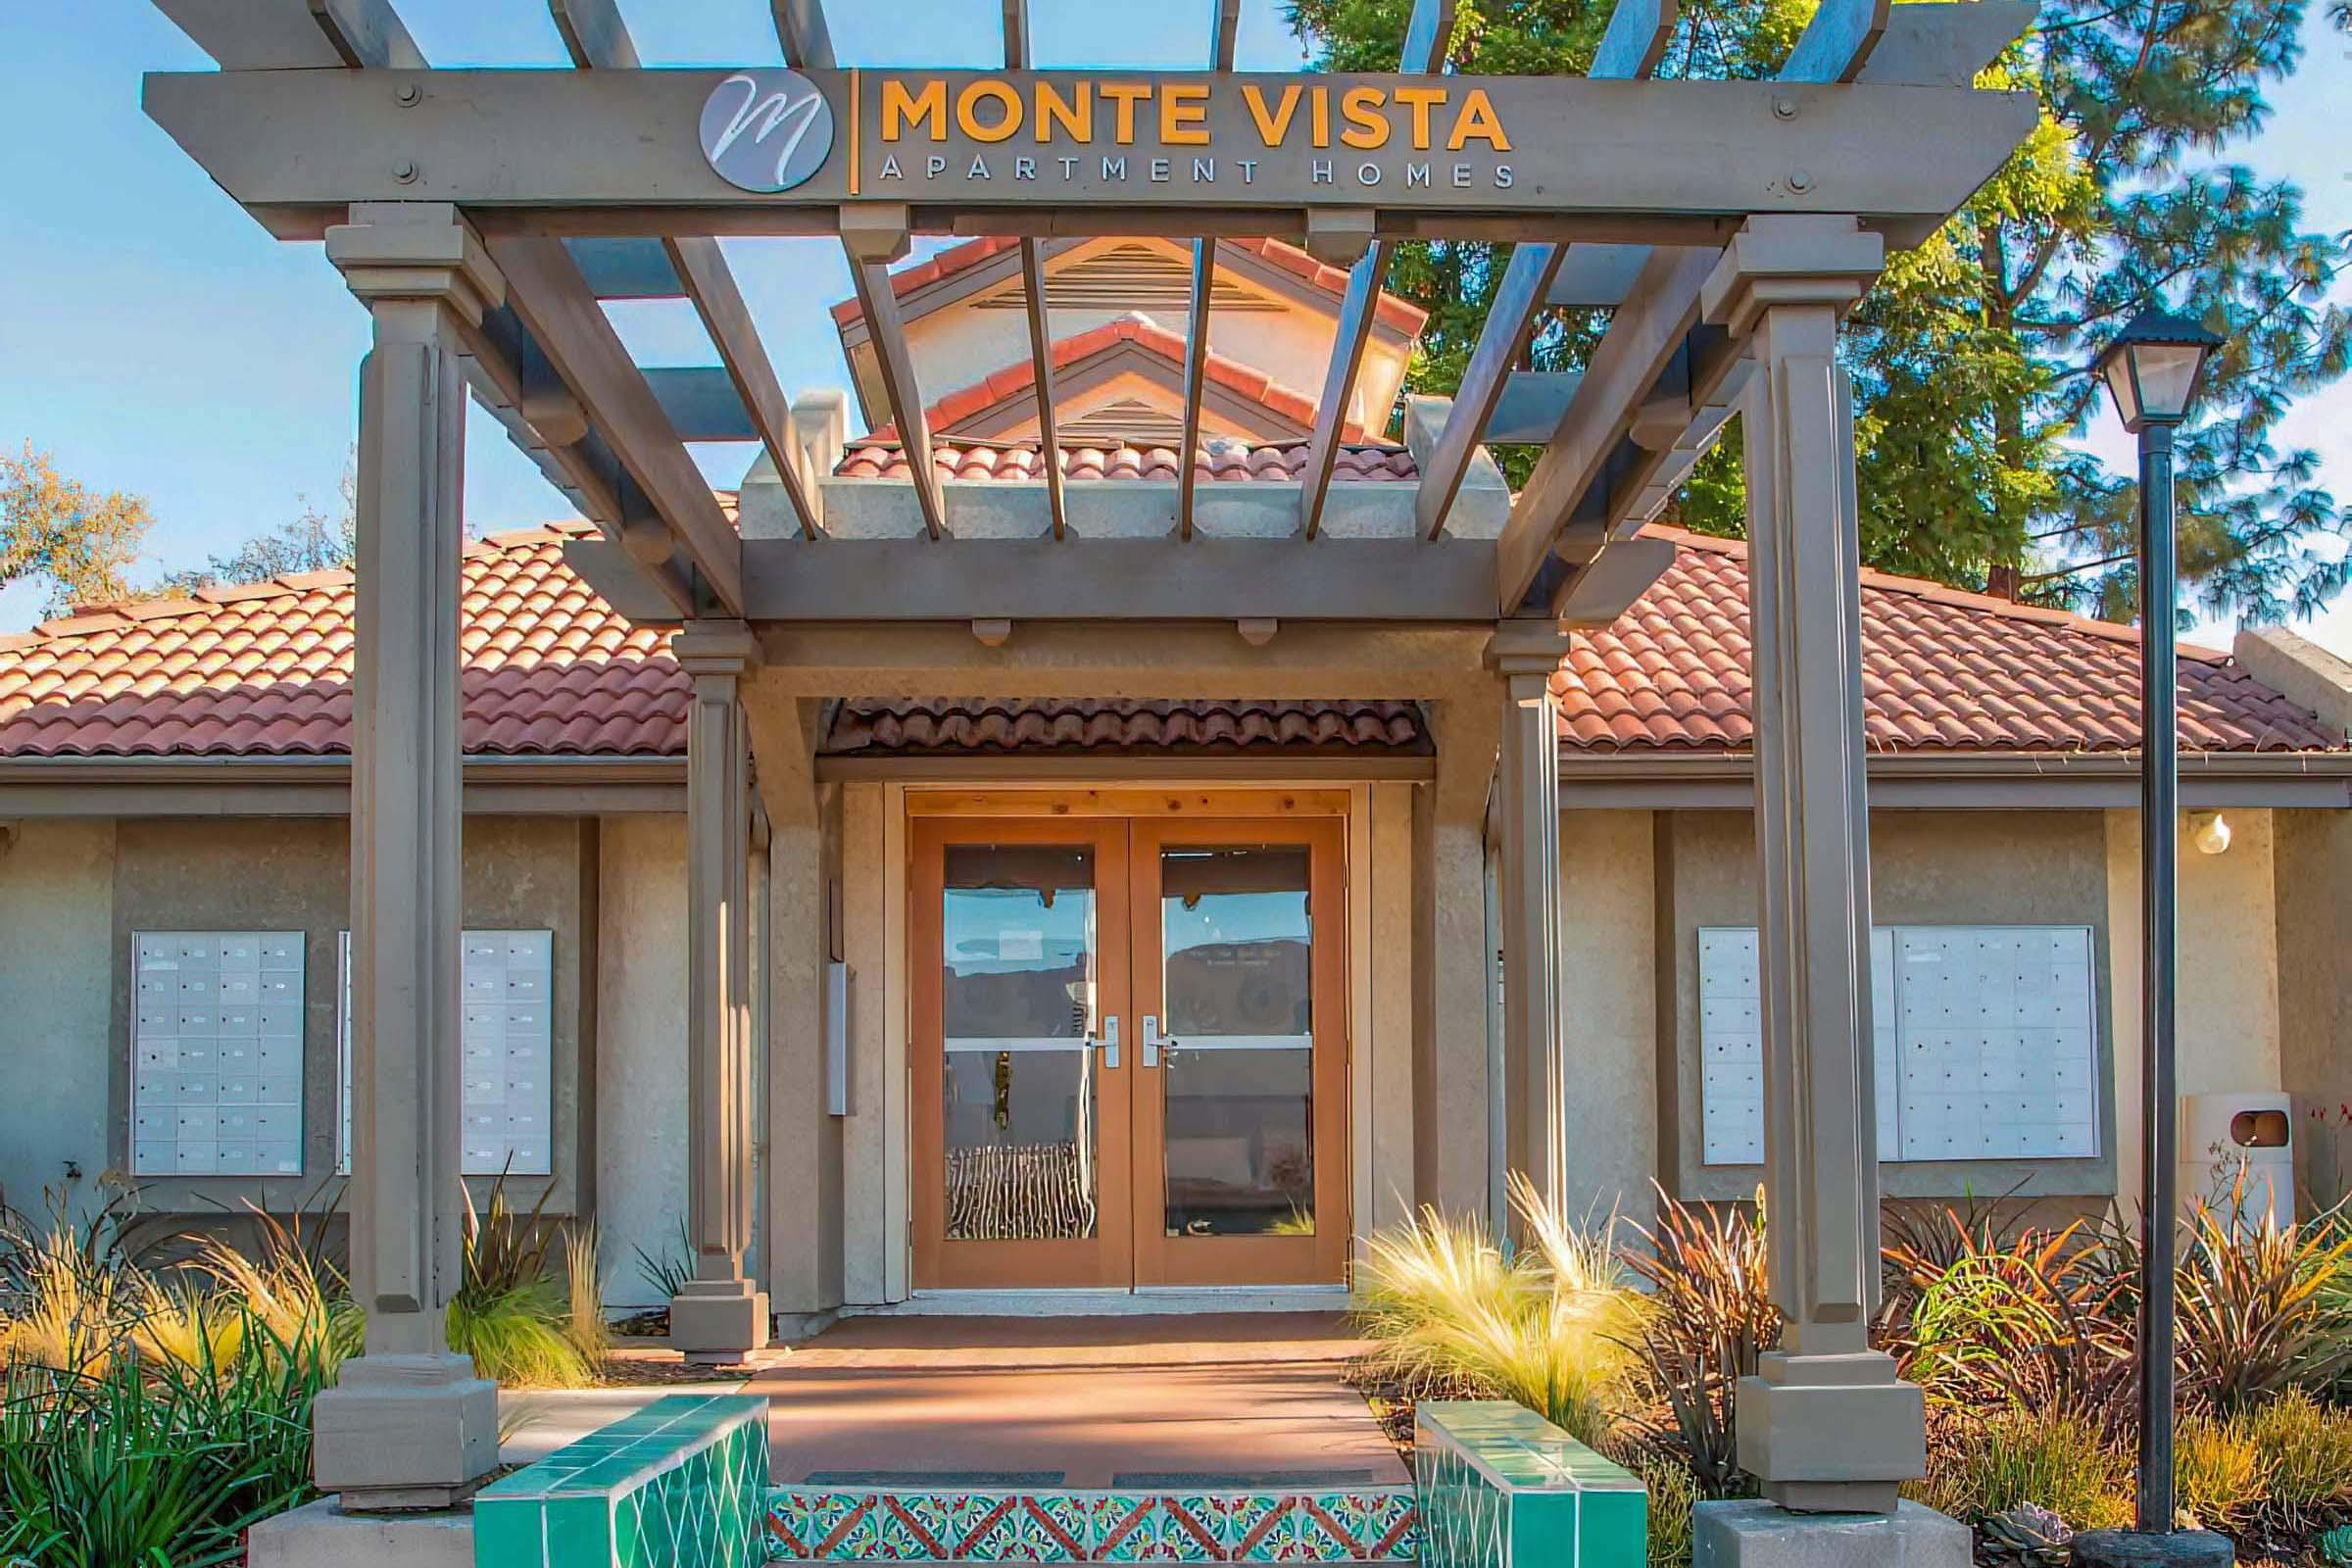 WELCOME HOME TO MONTE VISTA AT LAKE VIEW, CA!